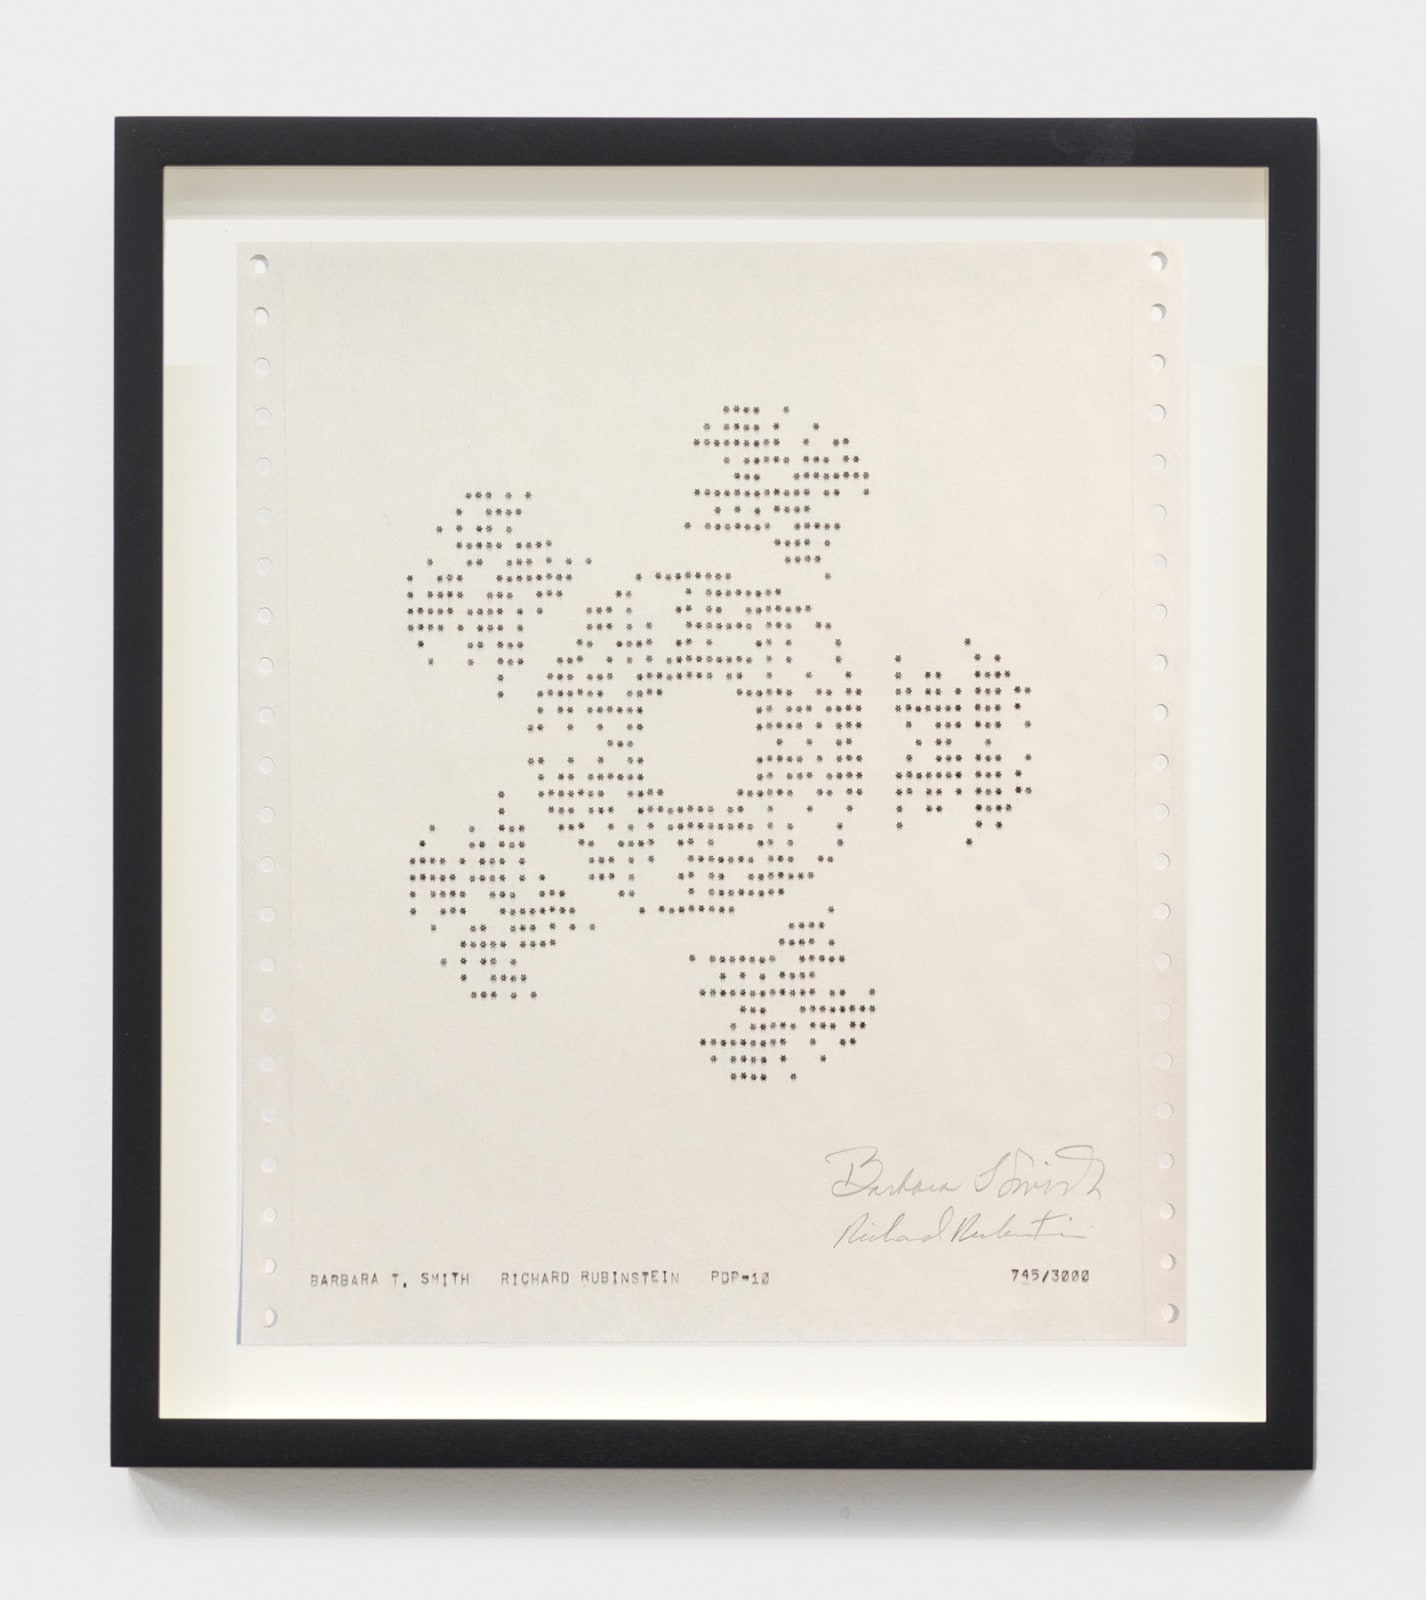 Barbara T. Smith Snowflake, 1975 PDP10 computer print on white sprocketed gate folded paper 11 x 9 1/2 in (27.9 x 24.1 cm) $5,000